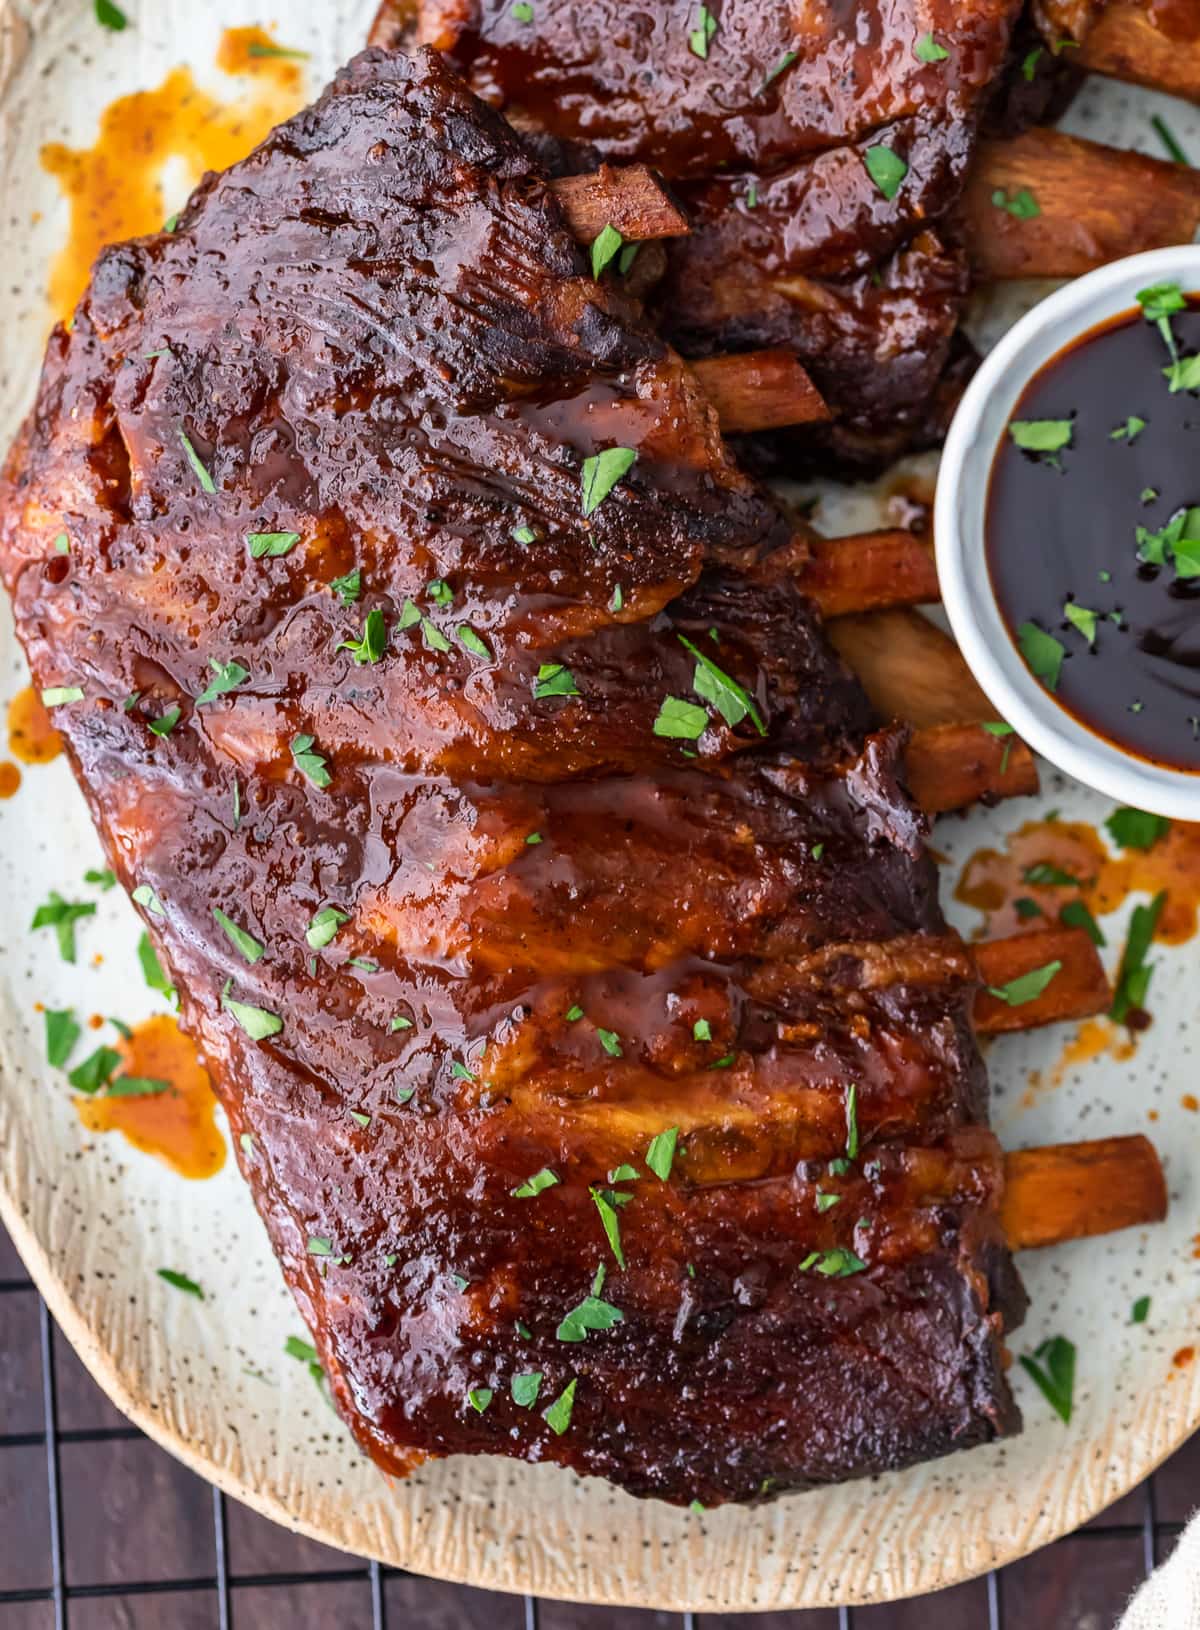 Crock Pot Ribs Slow Cooker Bbq Ribs Recipe How To Video,Dog Gestation Period In Months